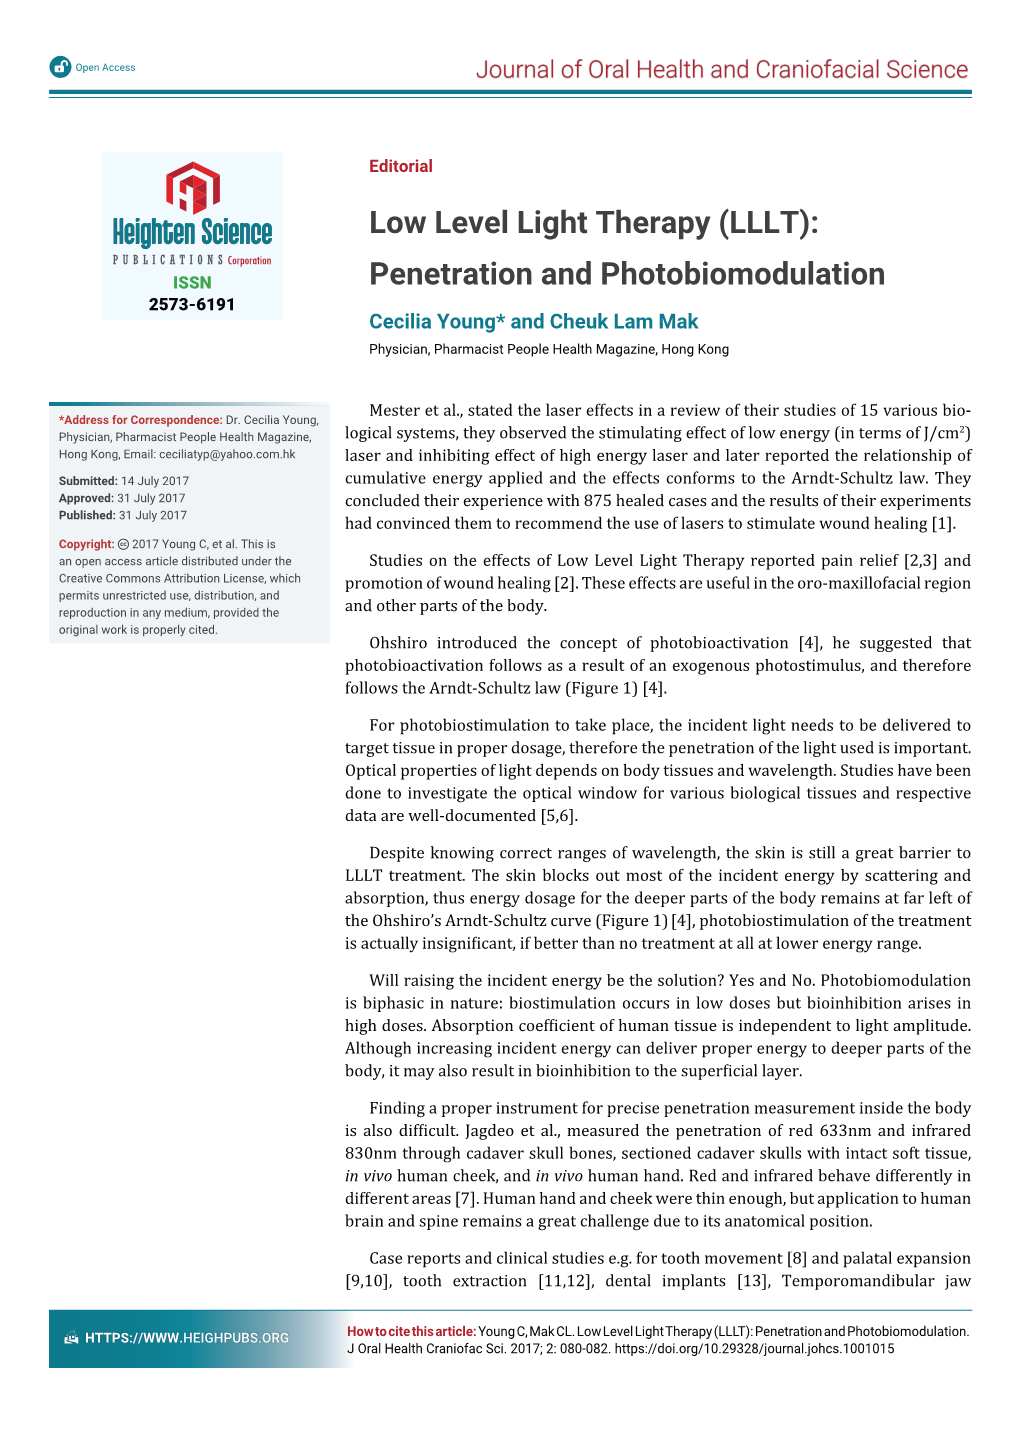 Low Level Light Therapy (LLLT): Penetration and Photobiomodulation